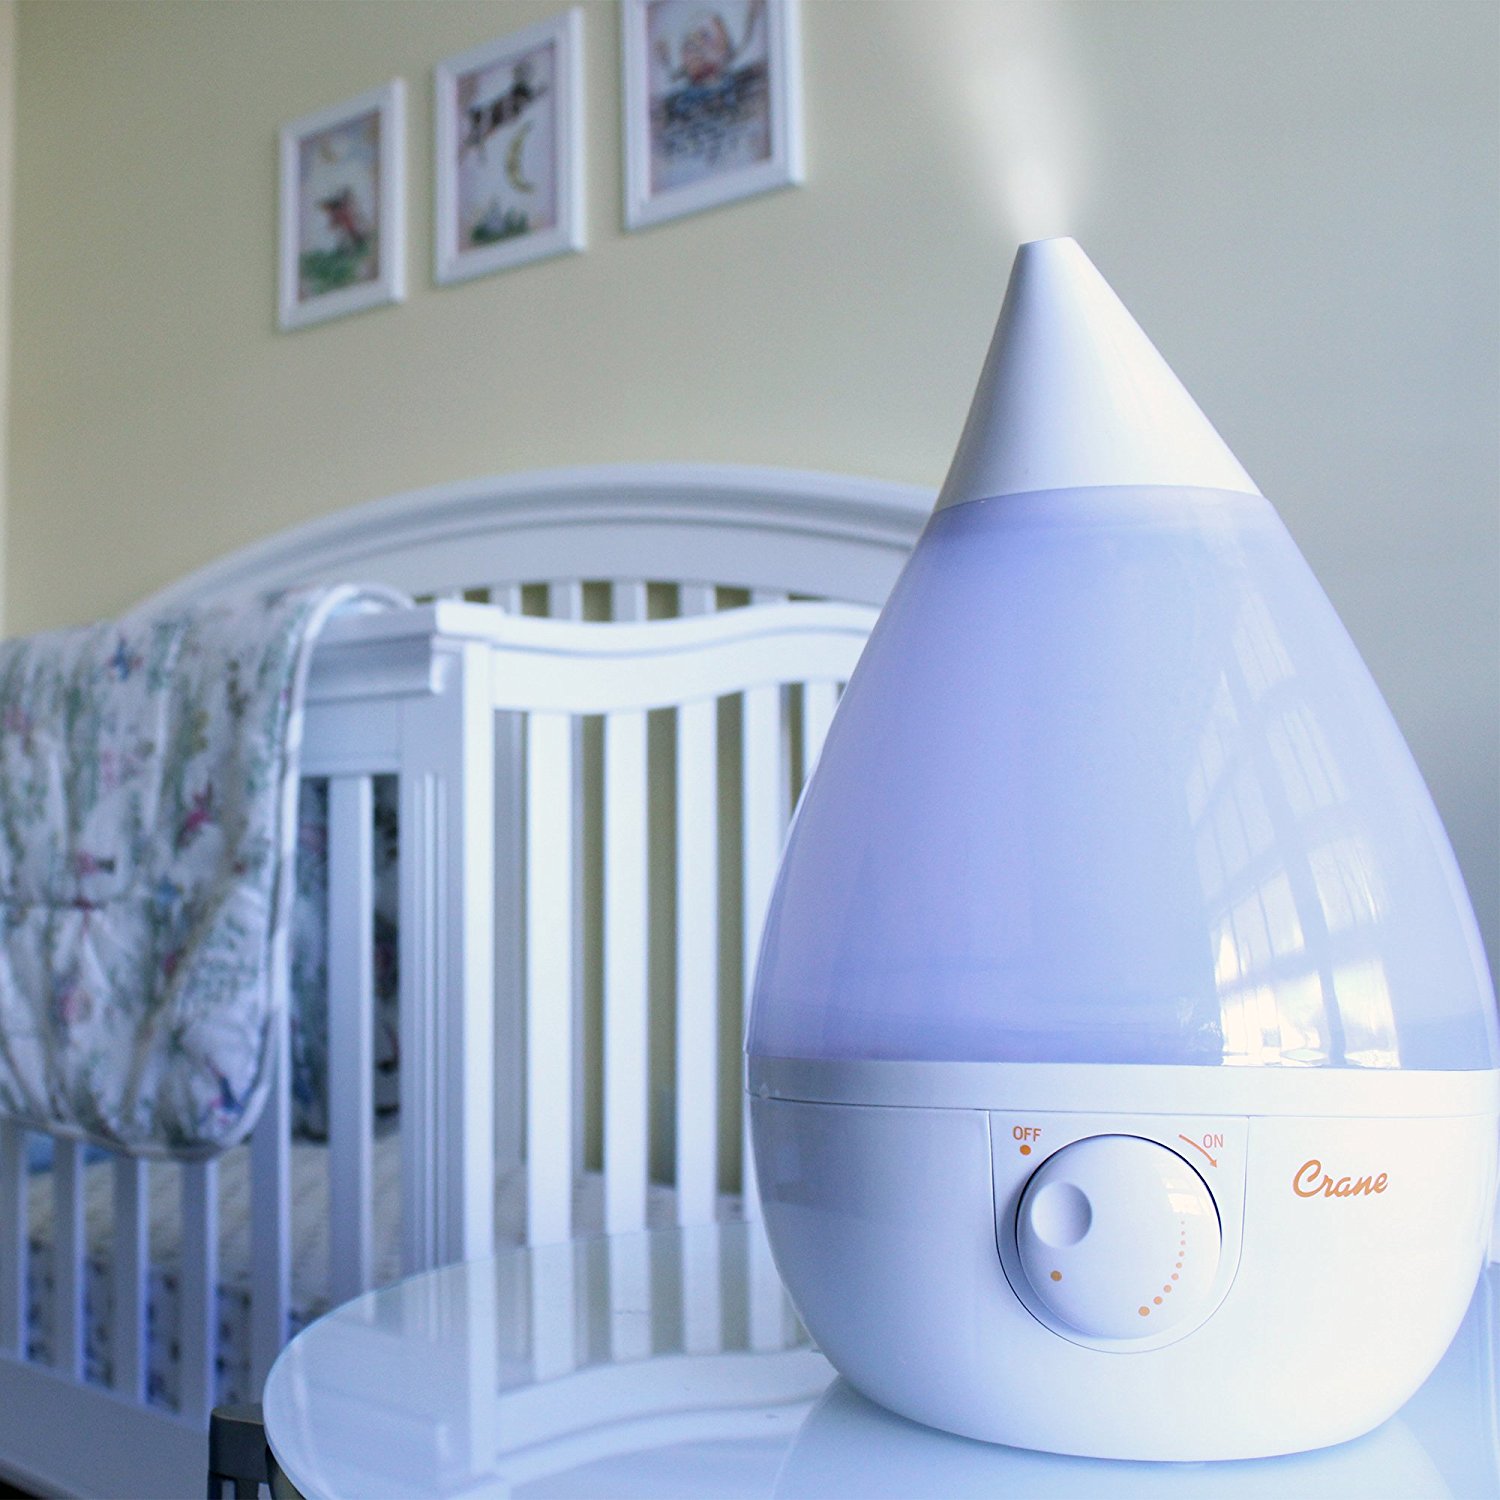 Best Cool Mist Humidifier: The Crane USA Humidifier